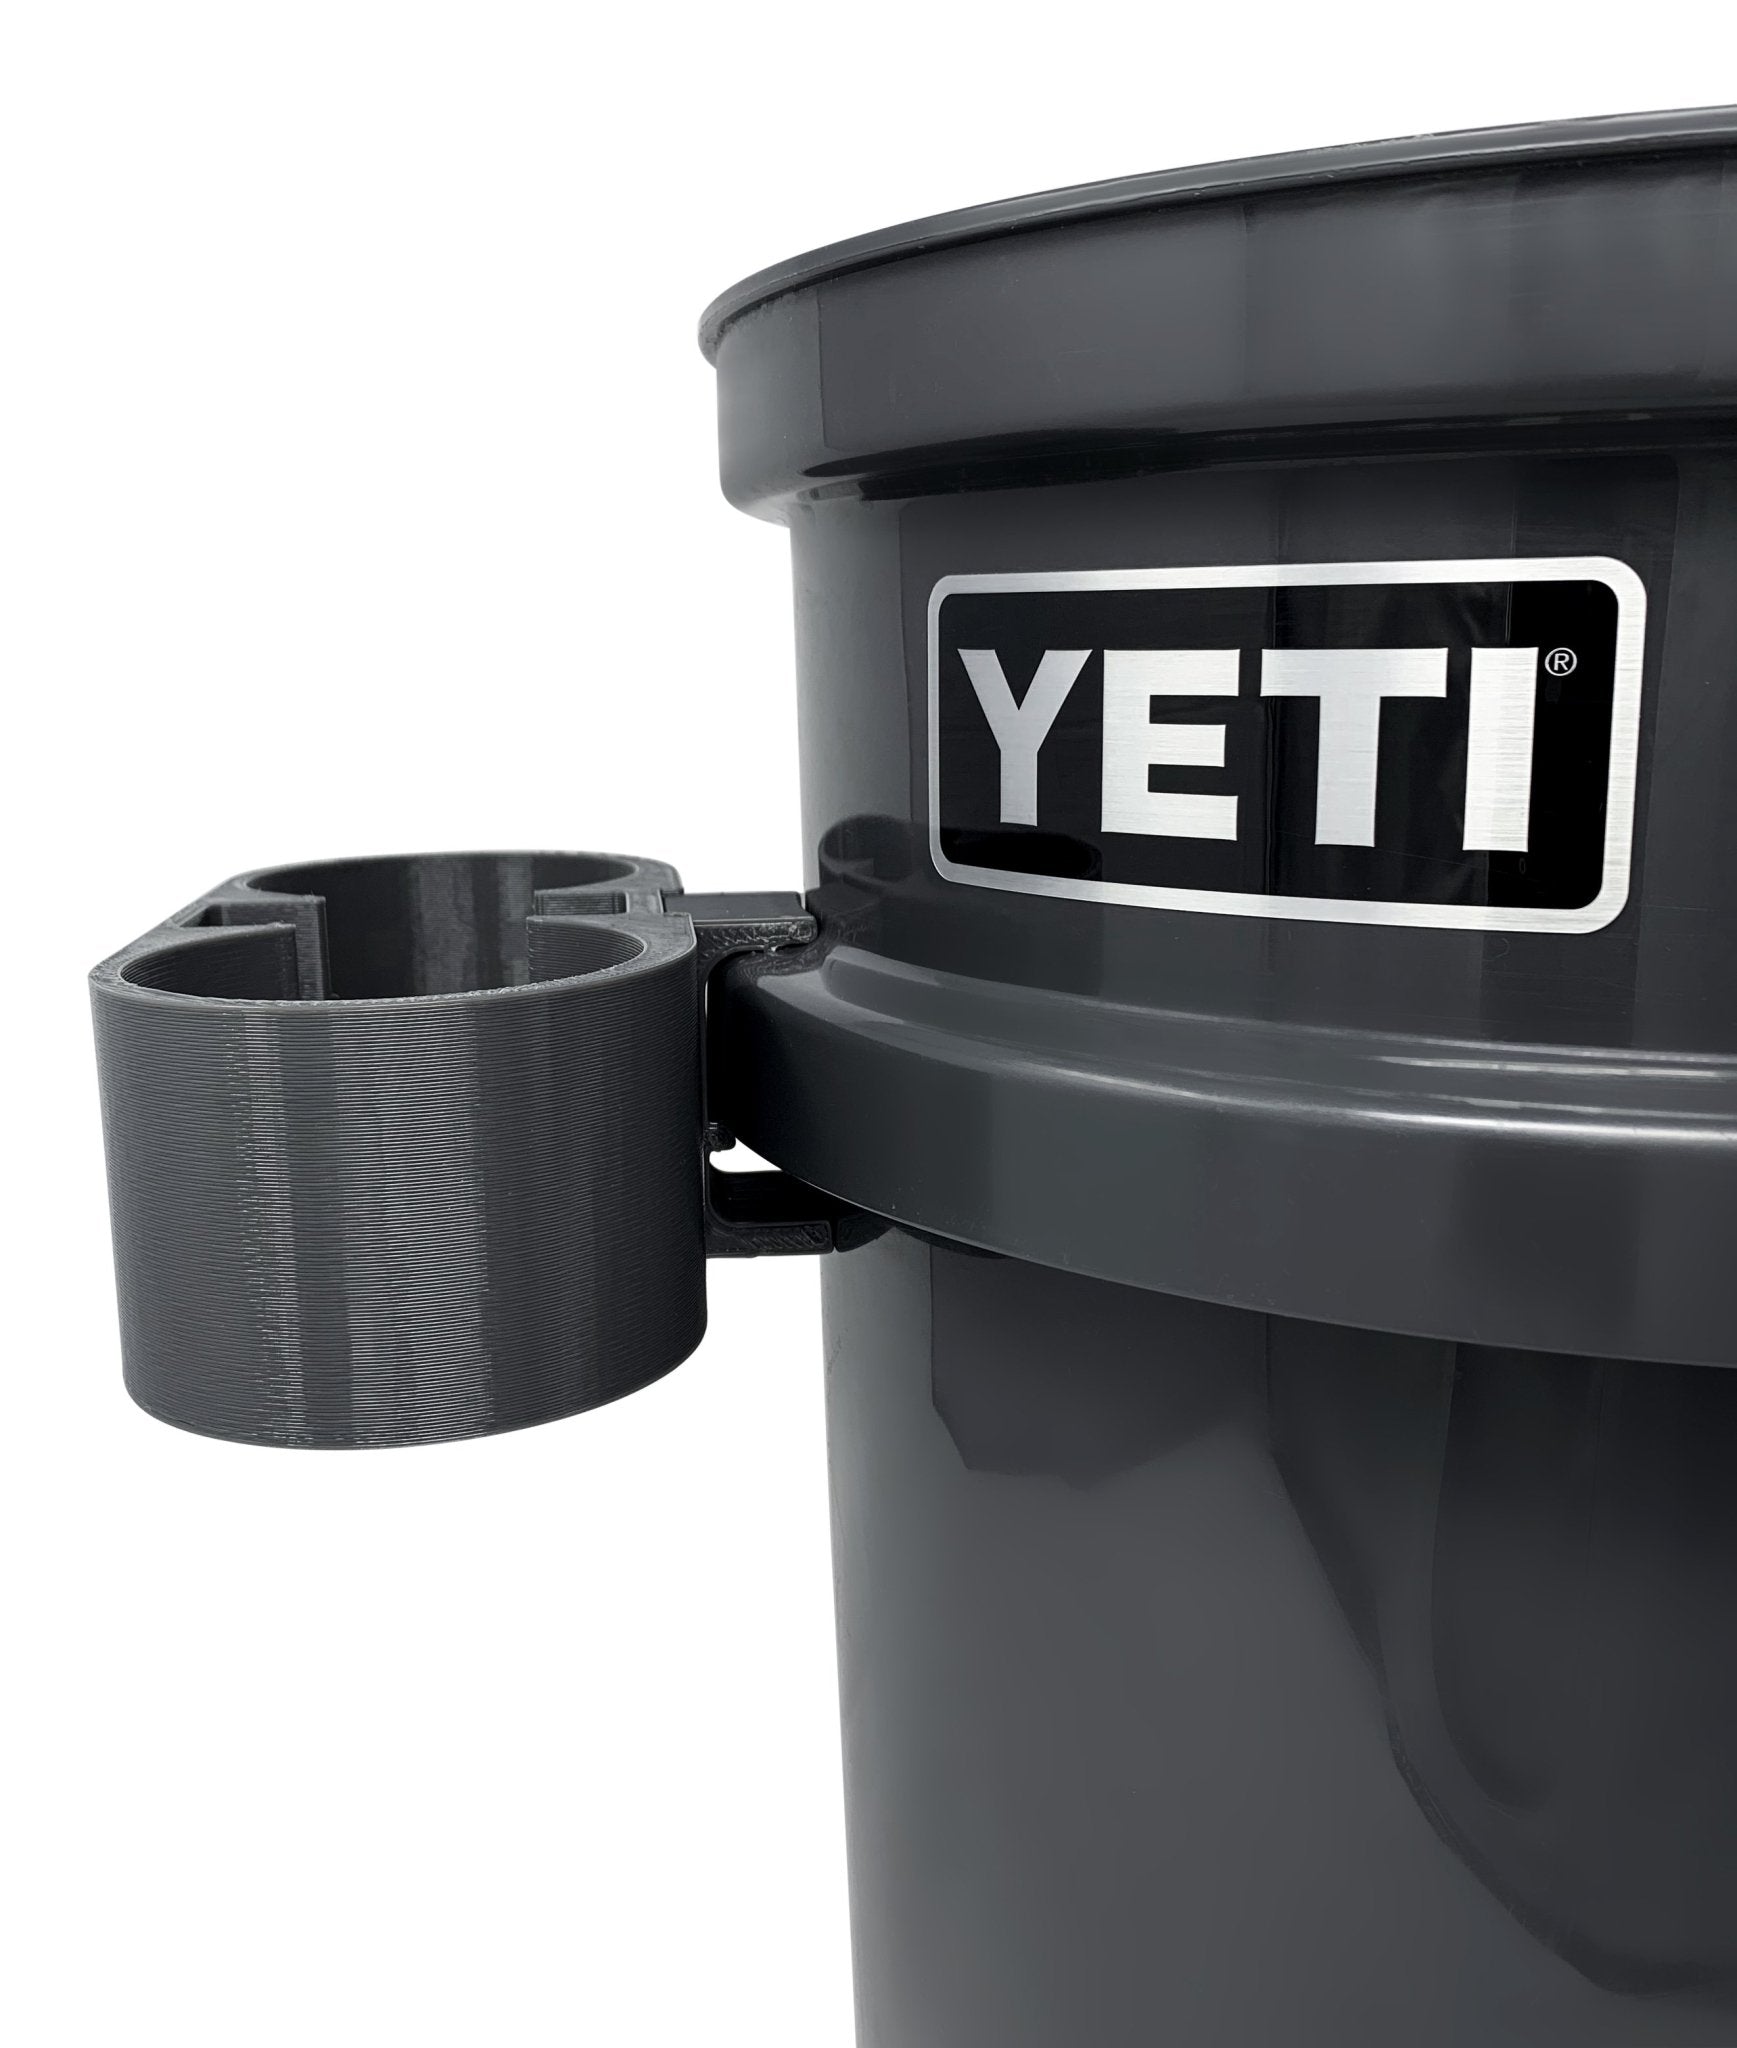 Cup Holder for YETI Tundra Coolers – Tideline3D